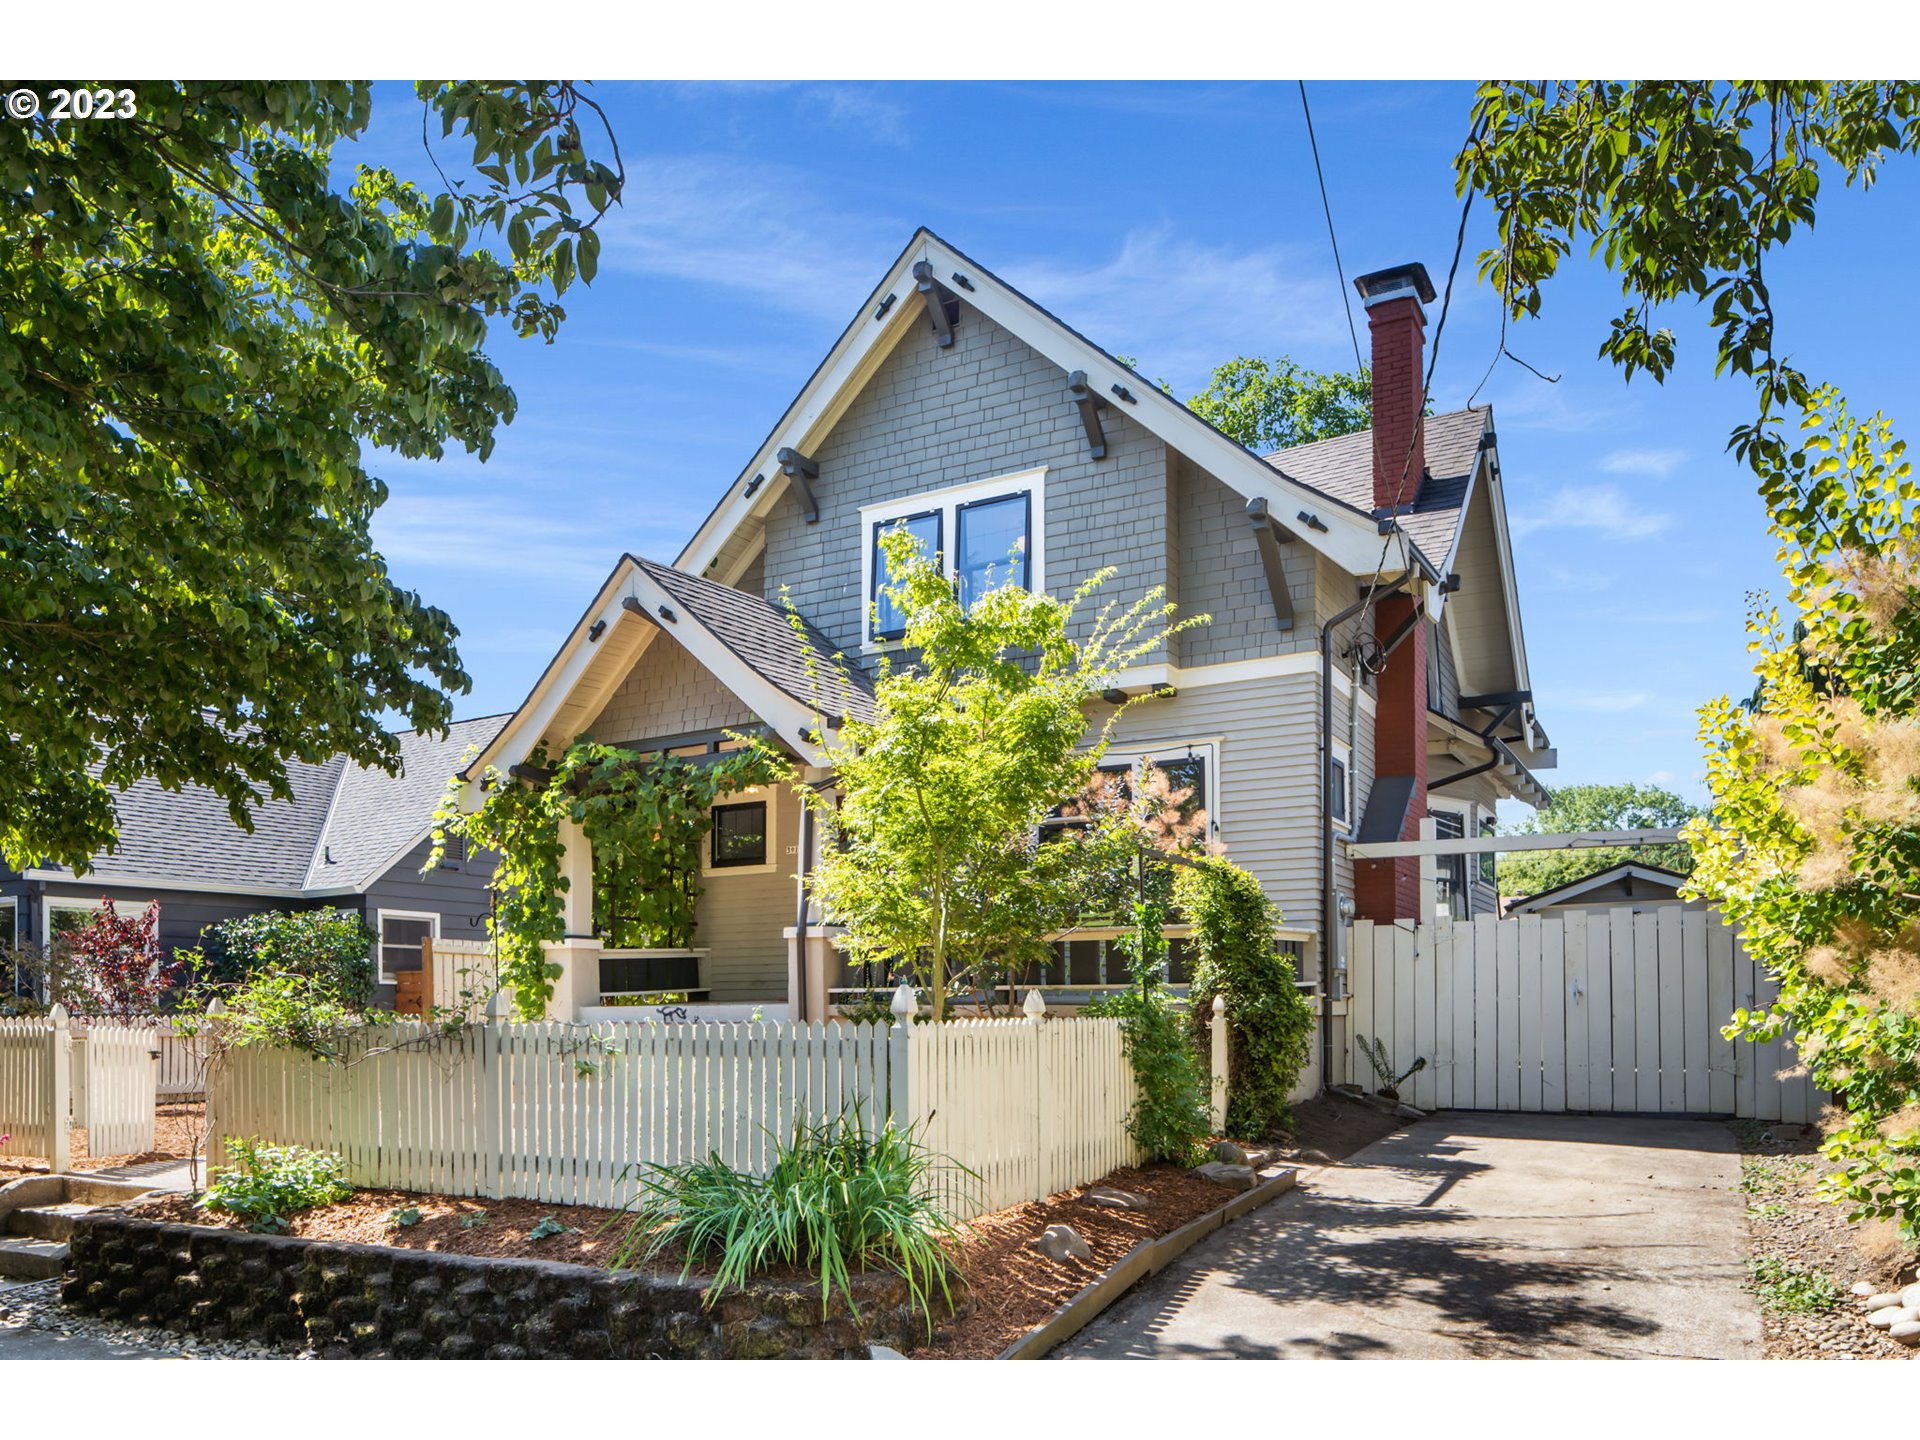 **Open Saturday 9/23 from 12-2pm** This home is special! Restored Craftsman with authentic charm in the heart of the Overlook Triangle. Fantastic layout with open living and formal dining, TRUE chef's kitchen, and three spacious beds up. Lower level with exterior entrance, large family room, and good ceiling height. Lower level with shower, bathroom renovation ready. Large windows bring in so much natural light. Period details include original oak flooring, restored fir sash windows with custom storm windows, and built-ins. Home features Rumford fireplace and mantle, French inspired kitchen with La Cornue Chateau 150 range and custom hood. This is worth googling if you are unfamiliar! New since 2012: Roof, gutters, siding, sewer line, water main, interior PEX piping, electrical wiring, interior trim.  Fenced, level backyard is ready is a blank slate ready for your touch. Stones throw to Overlook Park. Blocks to Mississippi shops and restaurants, the MAX, and the Adidas campus. [Home Energy Score = 1. HES Report at https://rpt.greenbuildingregistry.com/hes/OR10188512]